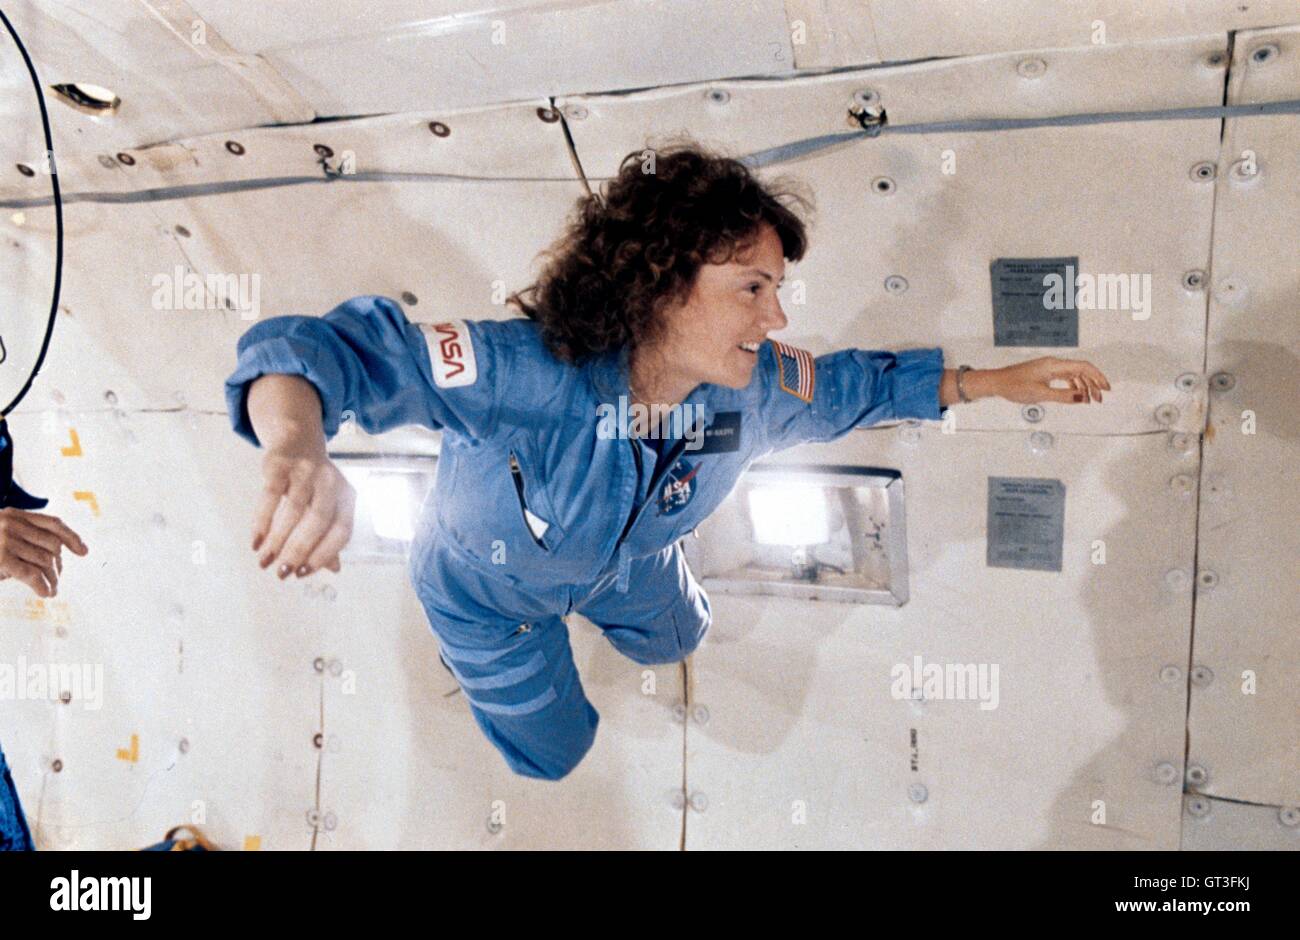 Teacher in Space Christa McAuliffe during microgravity training on the KC-135 reduced-gravity zero-G aircraft January 8, 1986. McAuliffe, was selected as a teacher in space to fly on the Space Shuttle Challenger mission STS-51-L which ended in catastrophic failure with the destruction of Challenger, 73 seconds after lift-off killing all aboard. Stock Photo